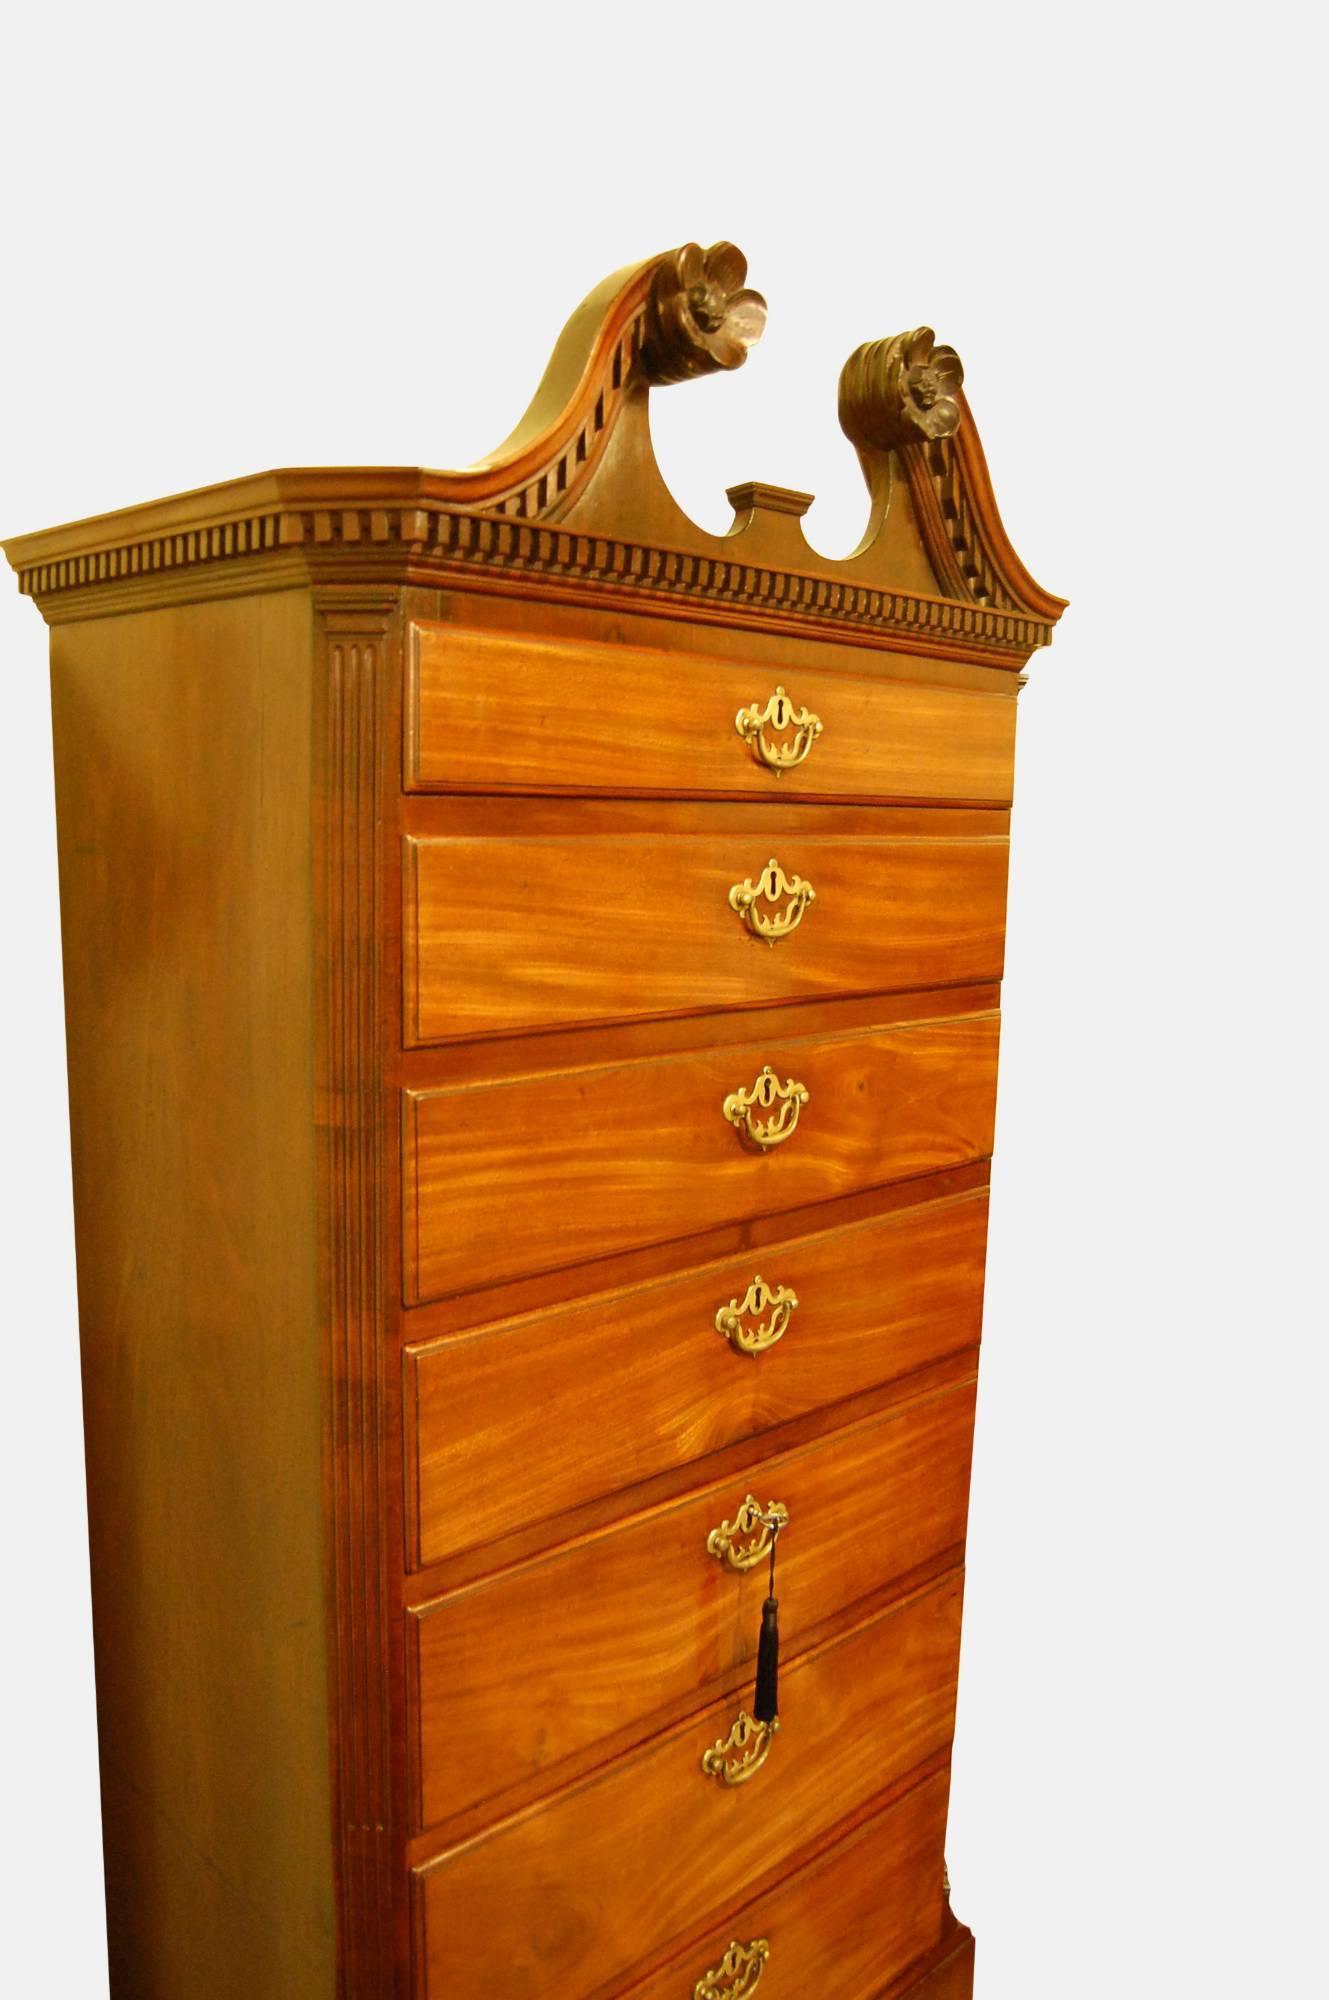 A fine mid-18th century carved mahogany Irish highboy of rare form

Seven graduated drawers flanked by stop fluted canted corners

Dentil moulded swan neck pediment with rosette carved terminals

Raised on conforming but not original